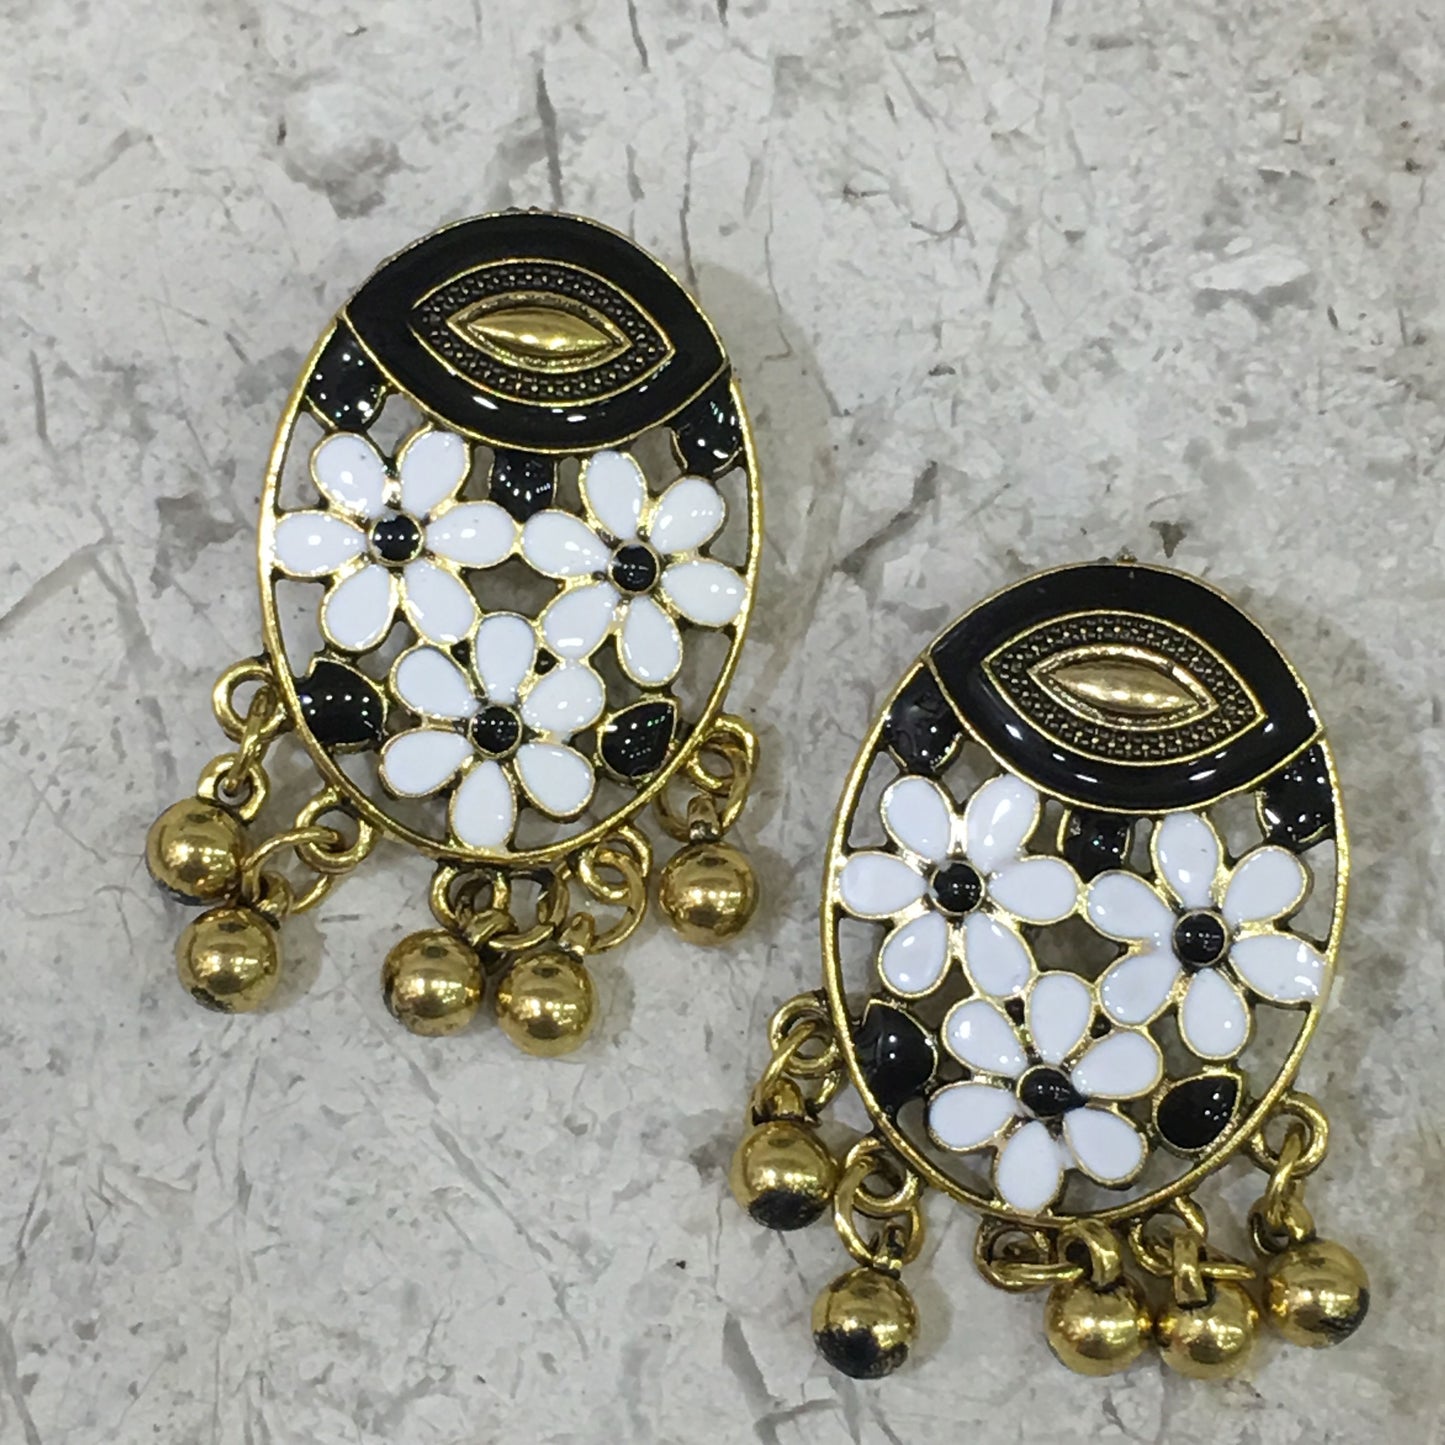 Digital Dress Room Traditional Gold Earring with Enaml Work and Dangling Gold Balls